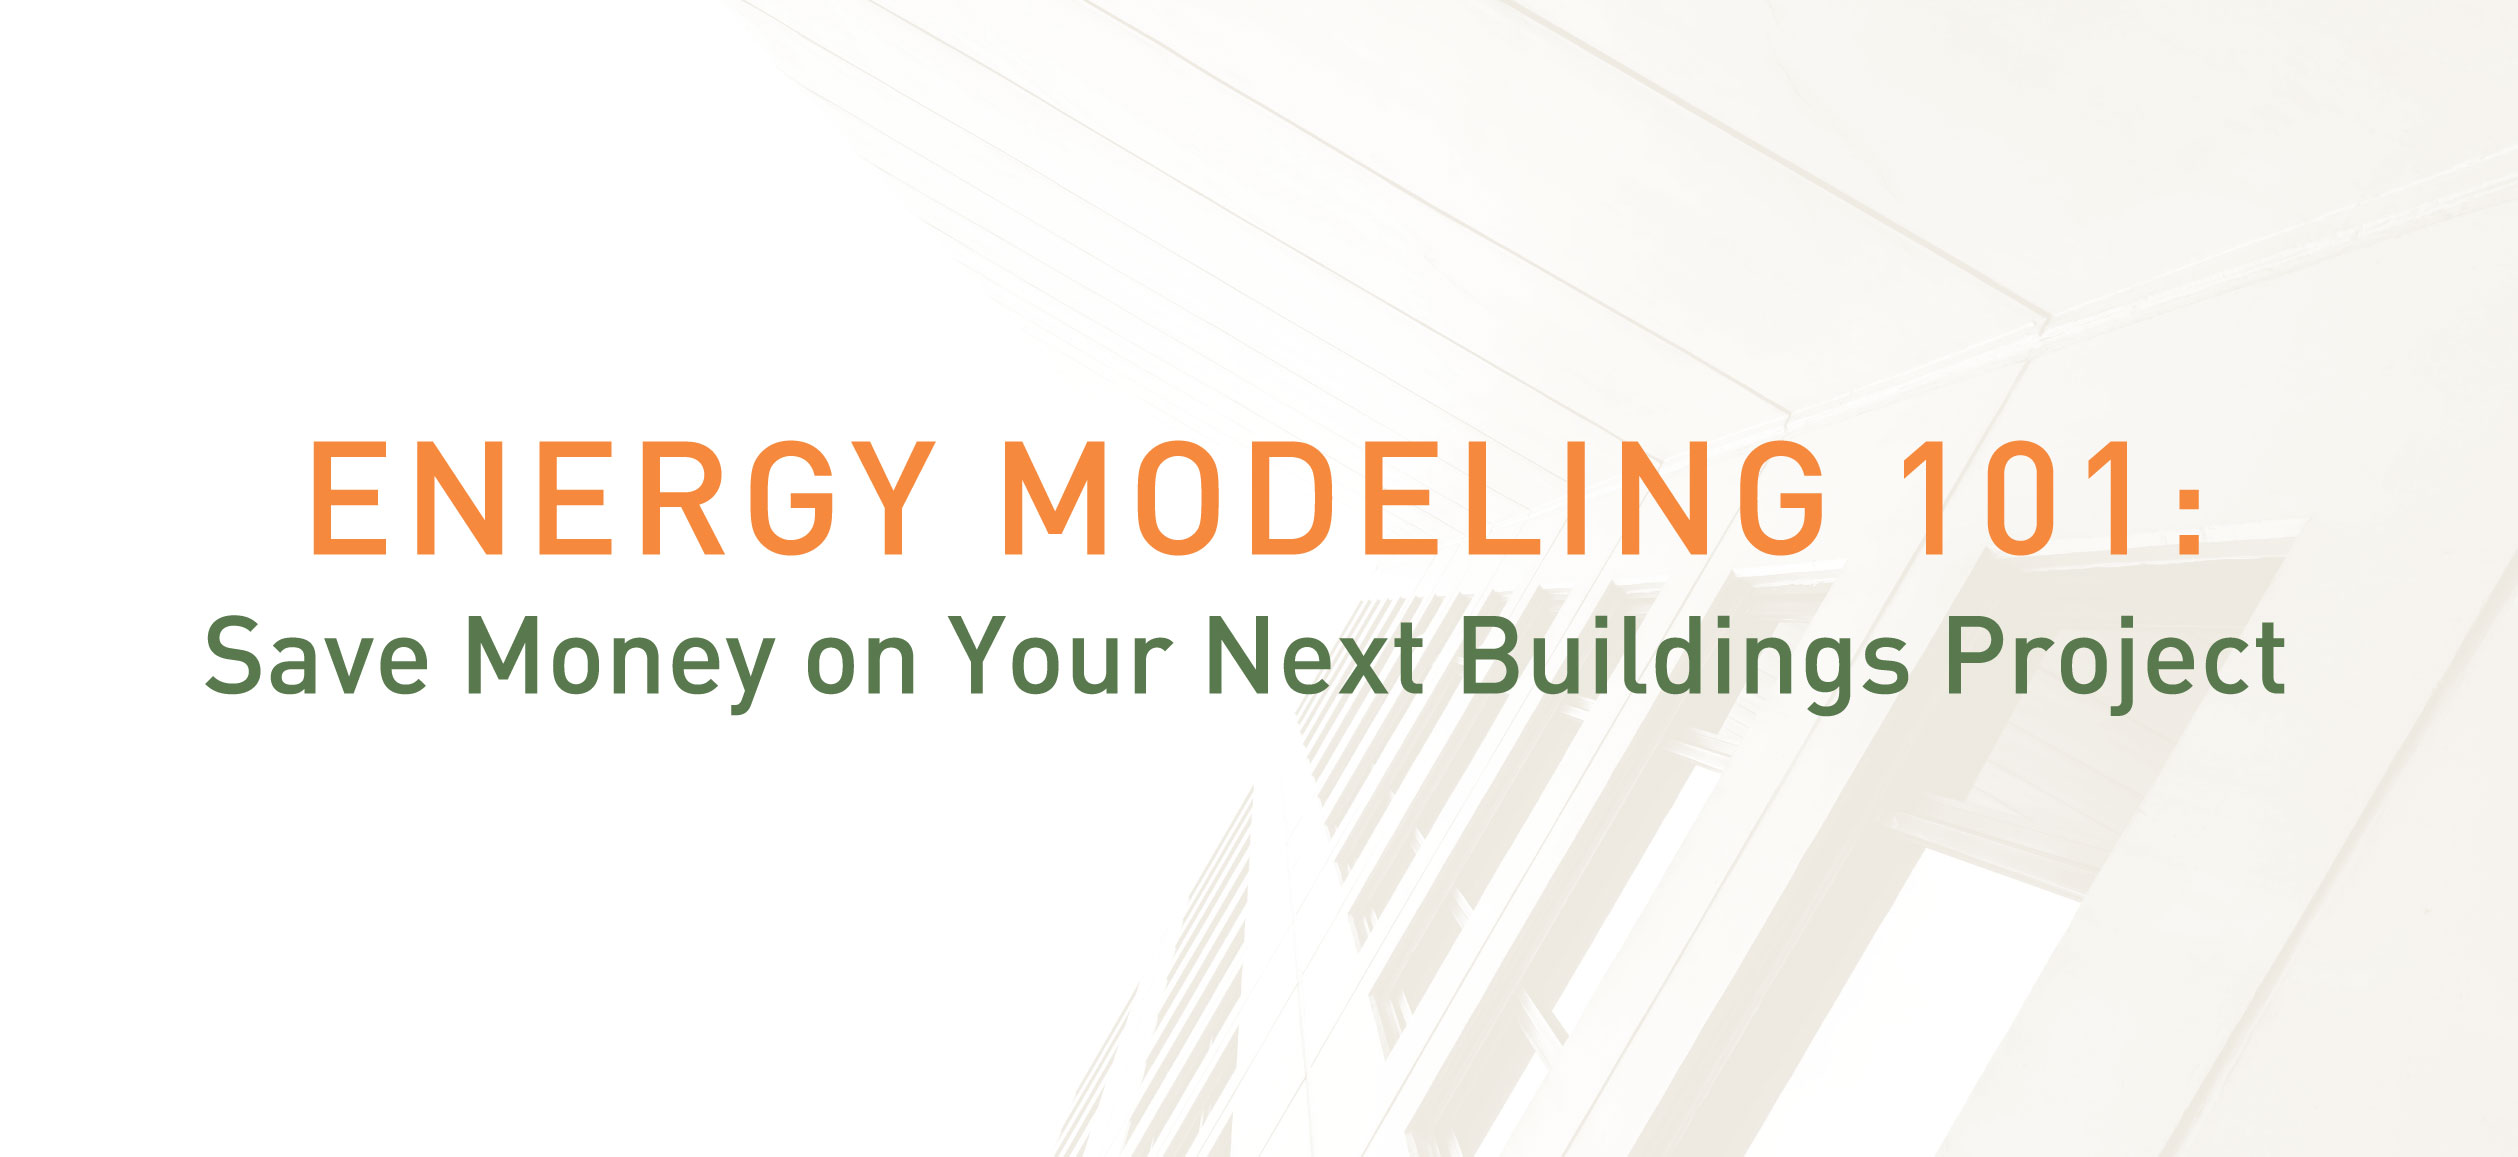 Energy Modeling 101: Save Money on Your Next Buildings Project